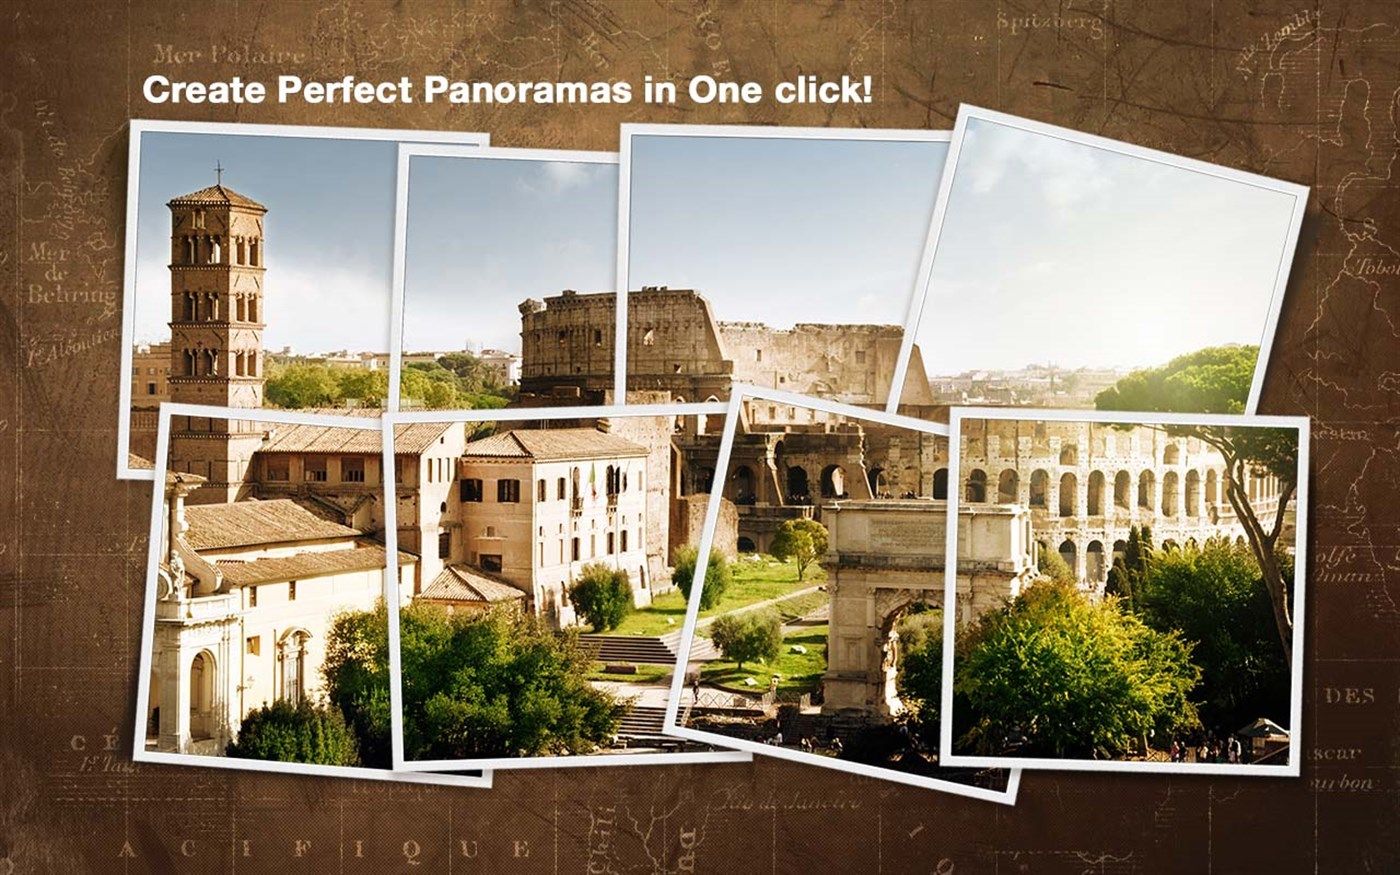 Create Perfect Panoramas in One Click